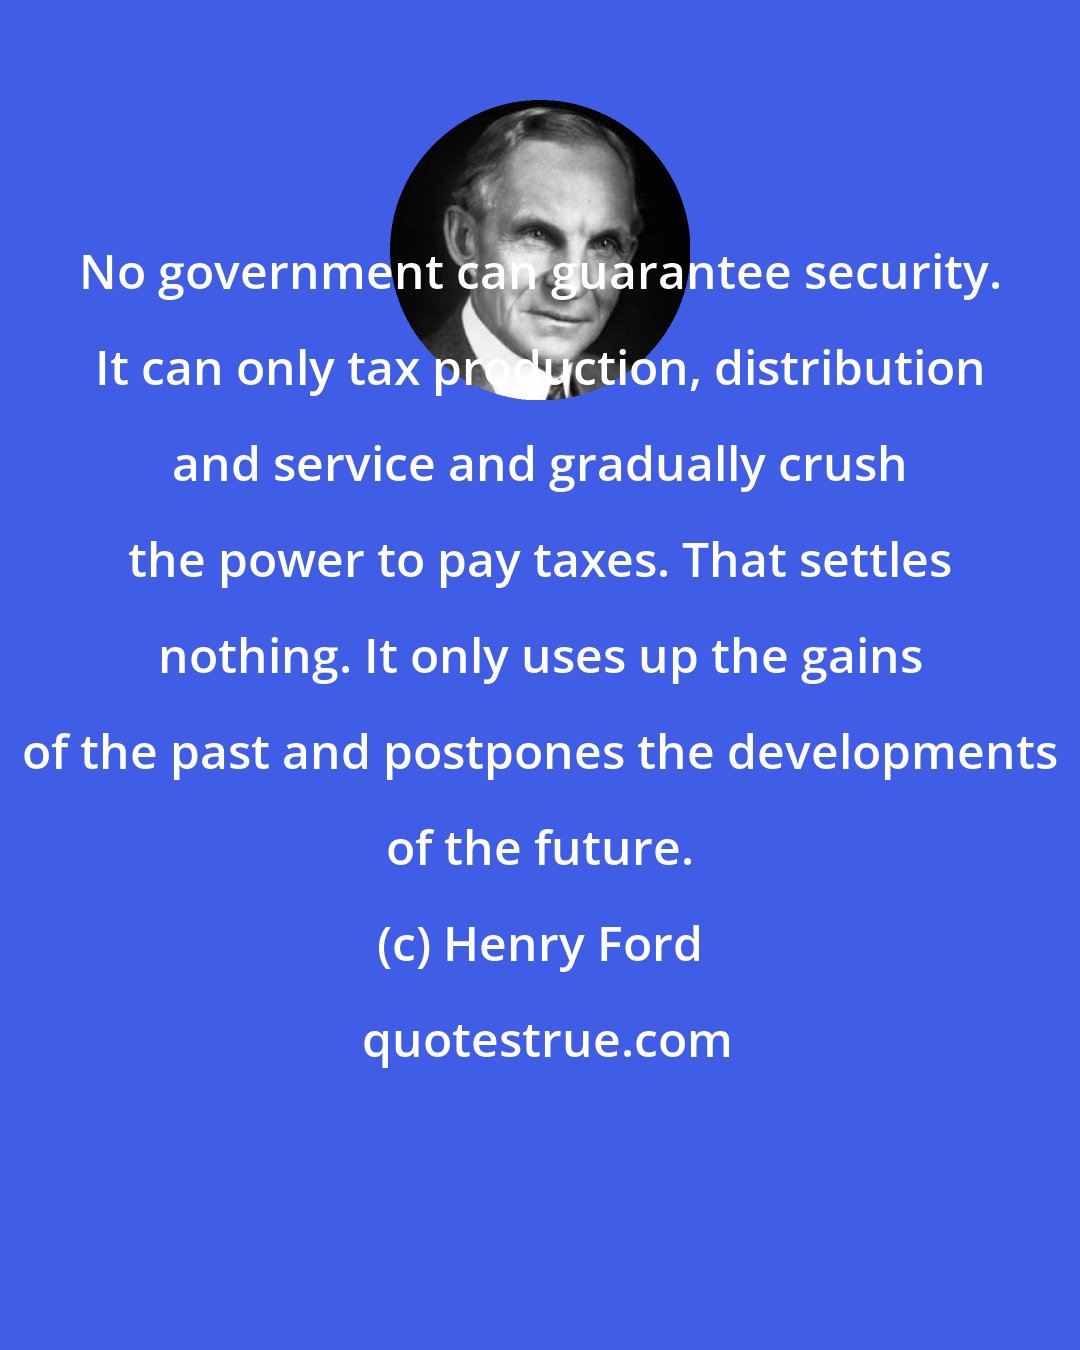 Henry Ford: No government can guarantee security. It can only tax production, distribution and service and gradually crush the power to pay taxes. That settles nothing. It only uses up the gains of the past and postpones the developments of the future.